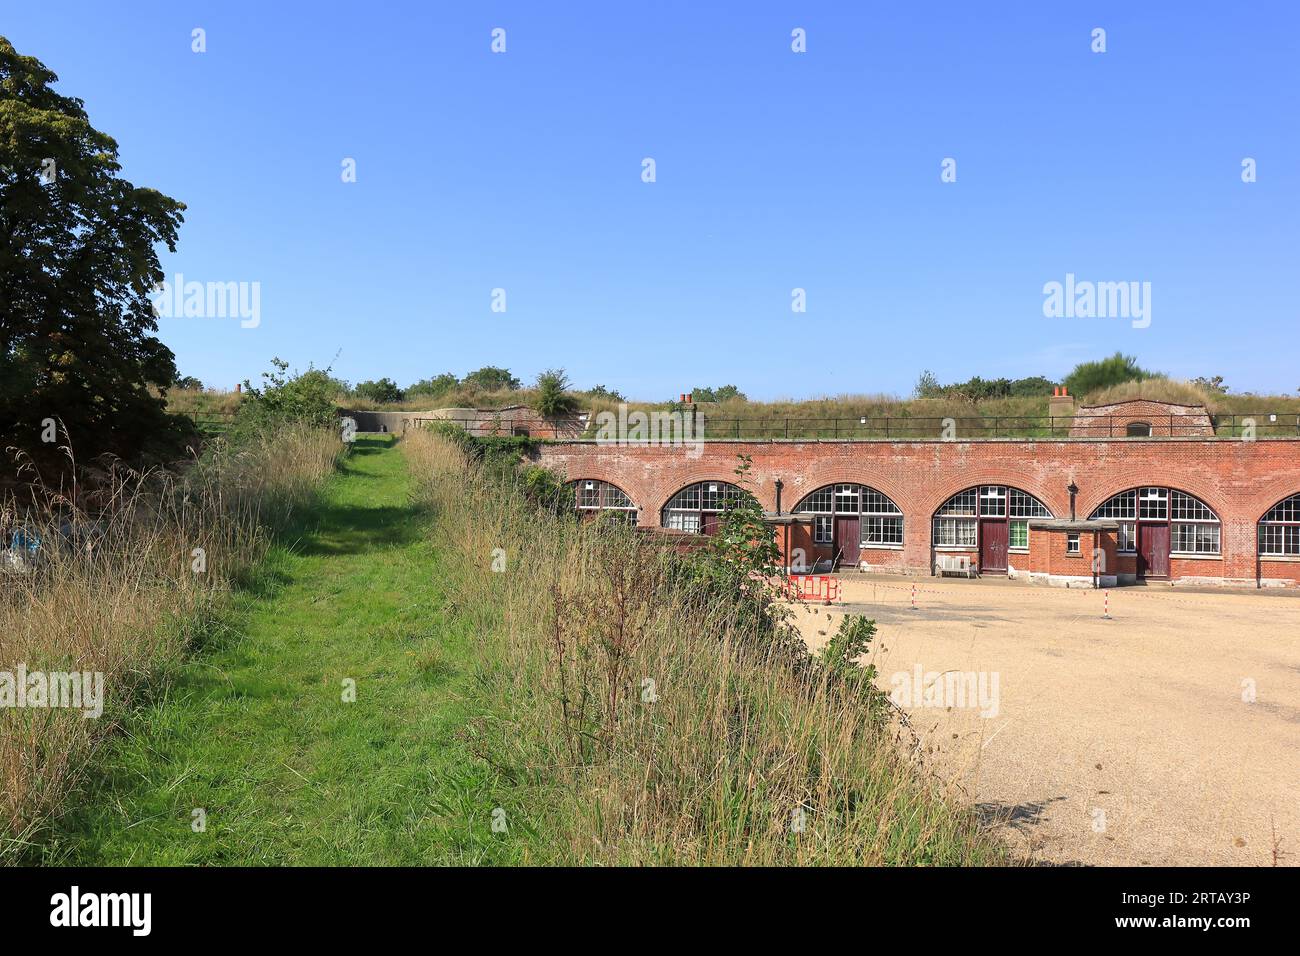 Fort Brockhurst, Gosport, Hampshire, England. September 10th 2023. Gosport Heritage Open Day. The fort was built between 1858 and 1862. A long grass ramp or path which allows visitors access to the grassy rooftops of the barrack rooms. Stock Photo